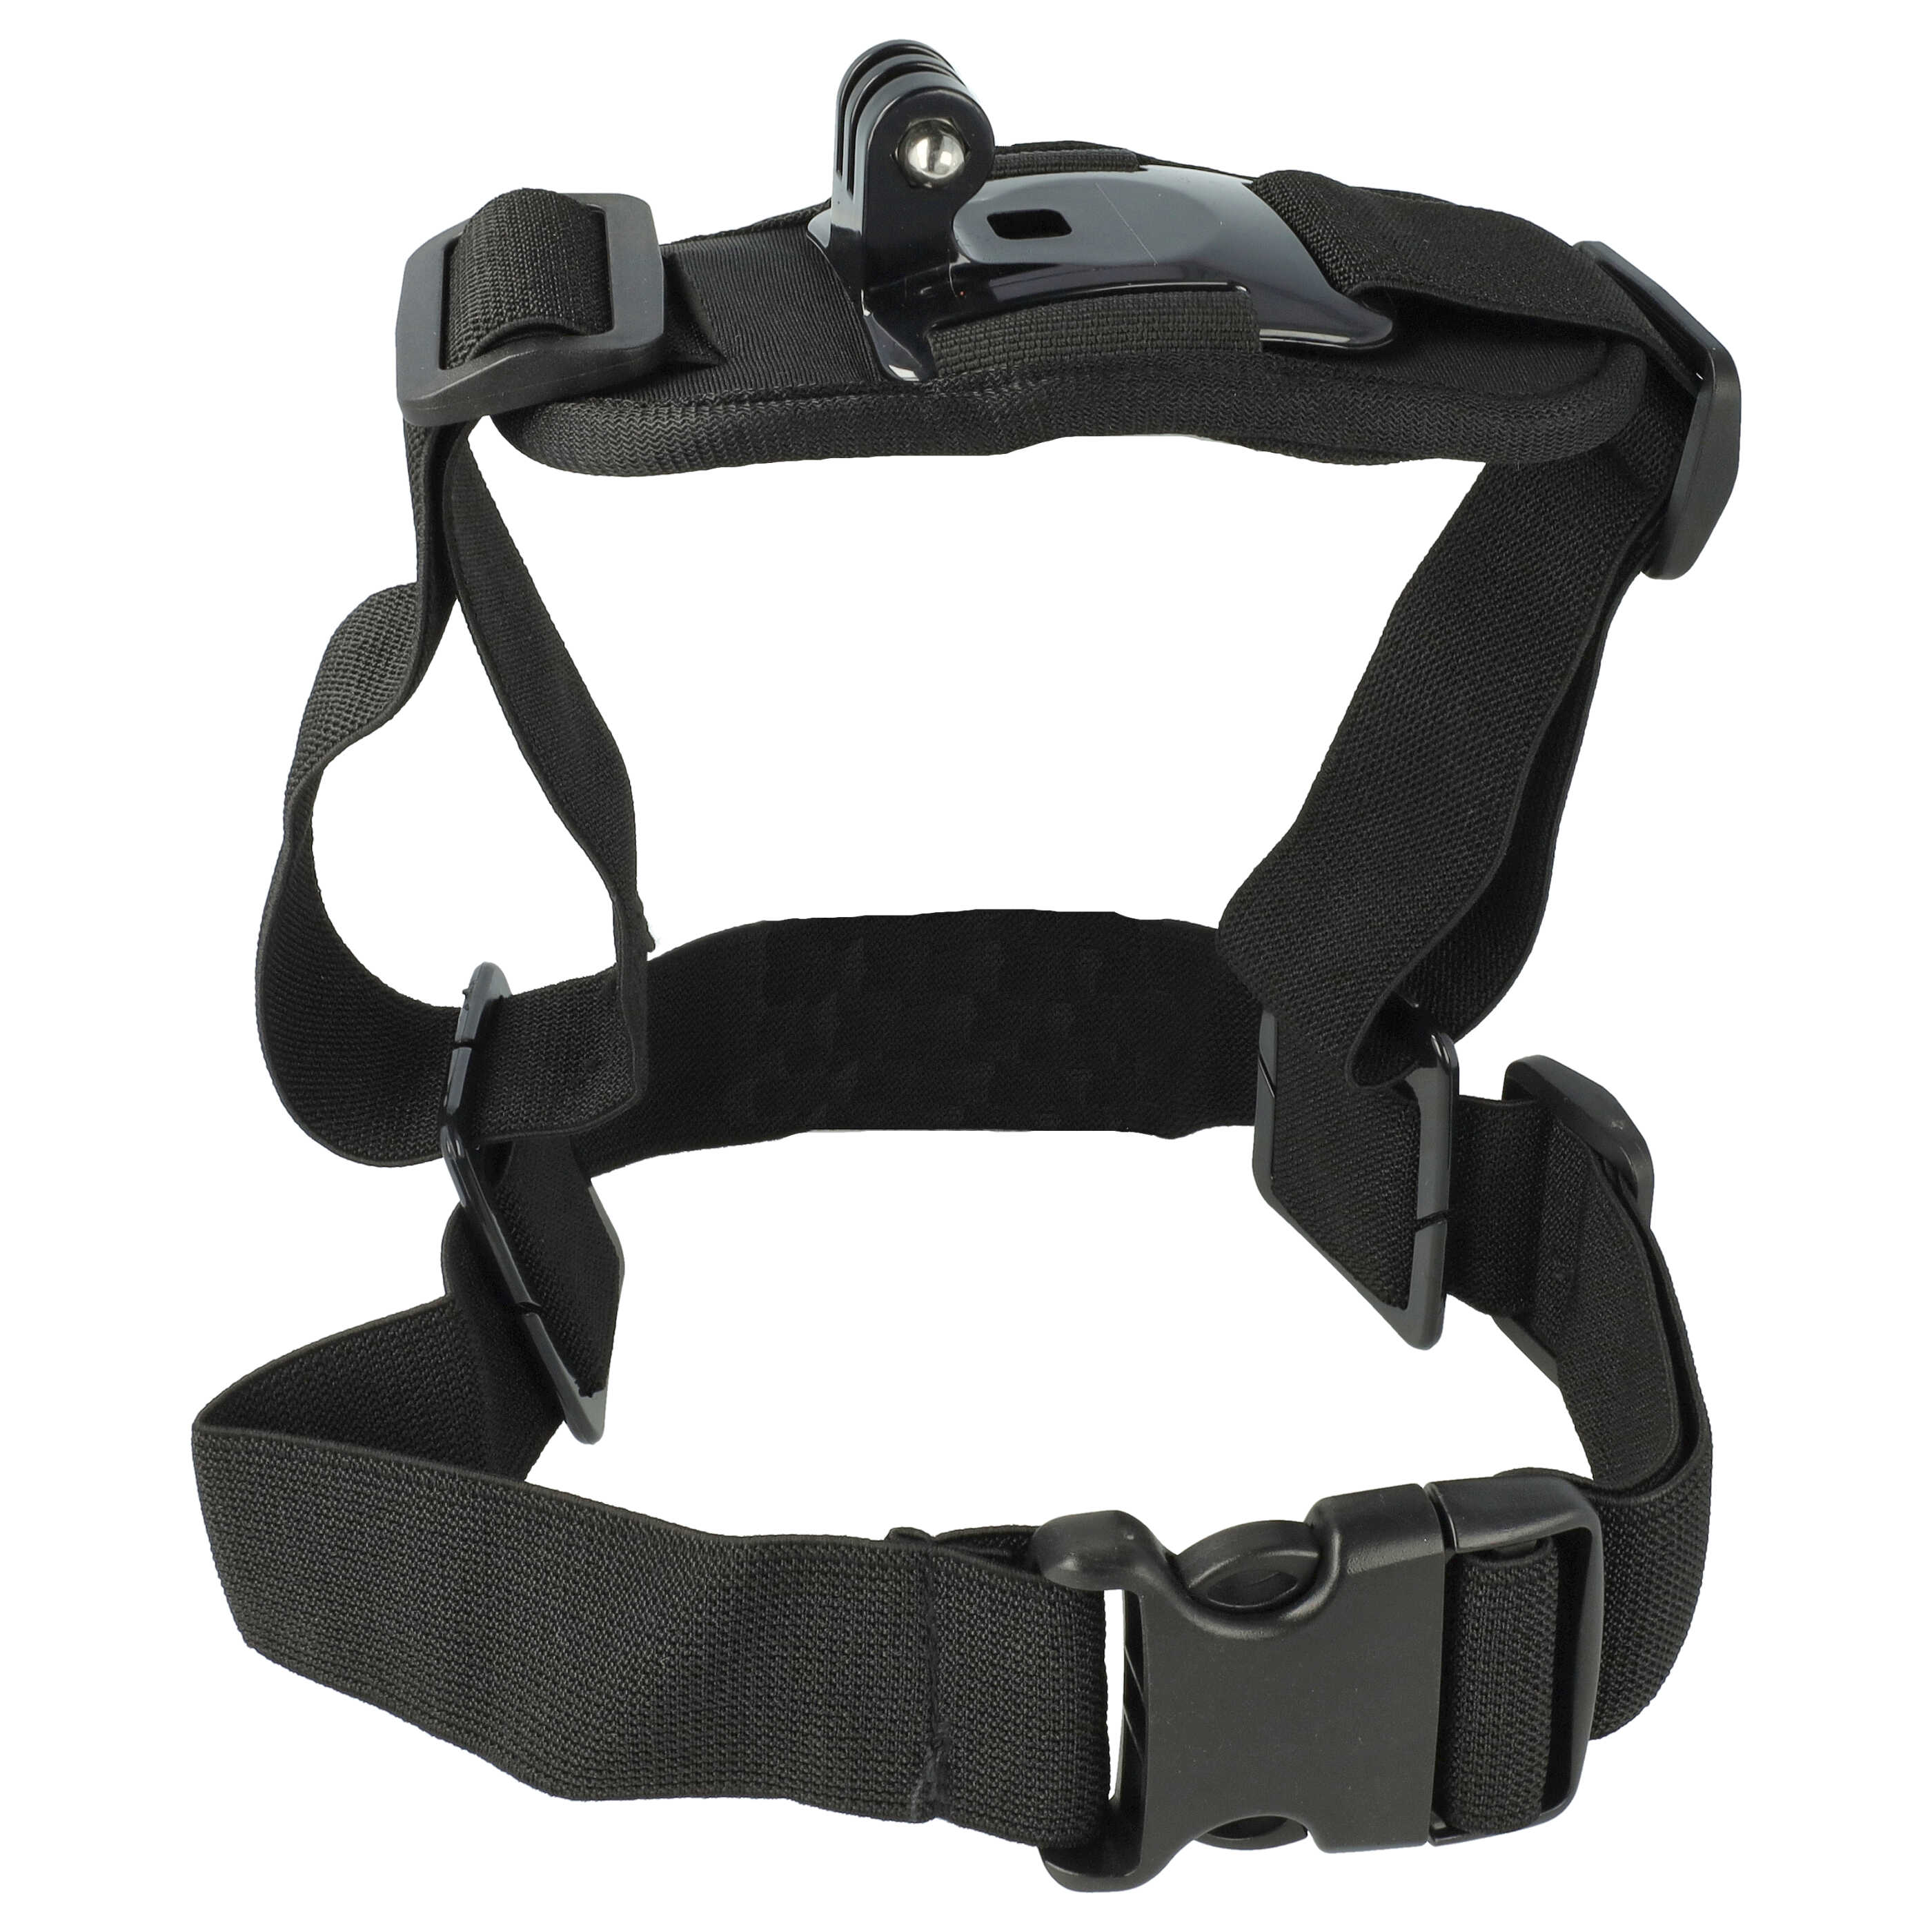 3 Way Chest Strap suitable for GoPro HD Hero Action Camera etc. - Adjustable, Mount, Quick Release Clip